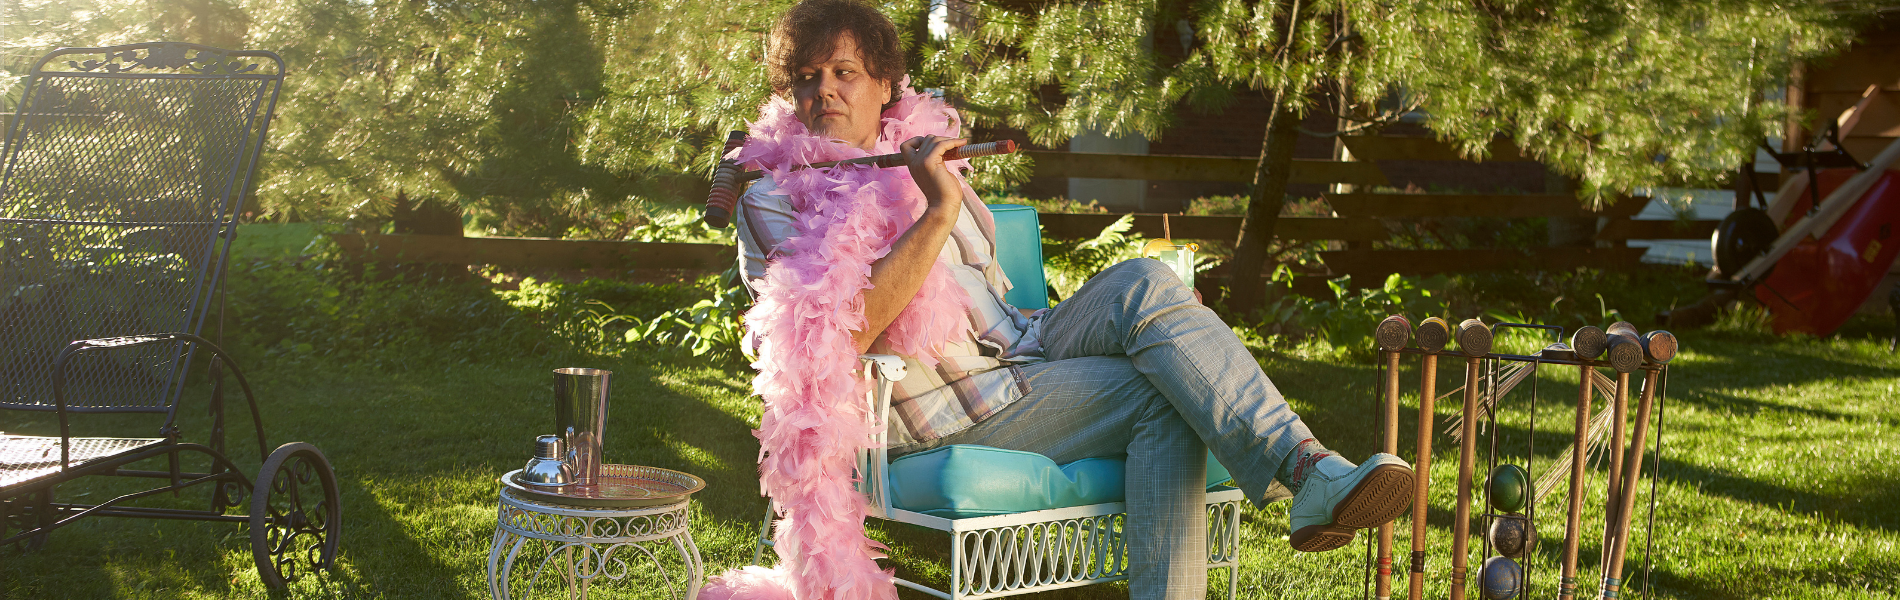 Ron Sexsmith with a pink feather boa sitting on a chair among trees